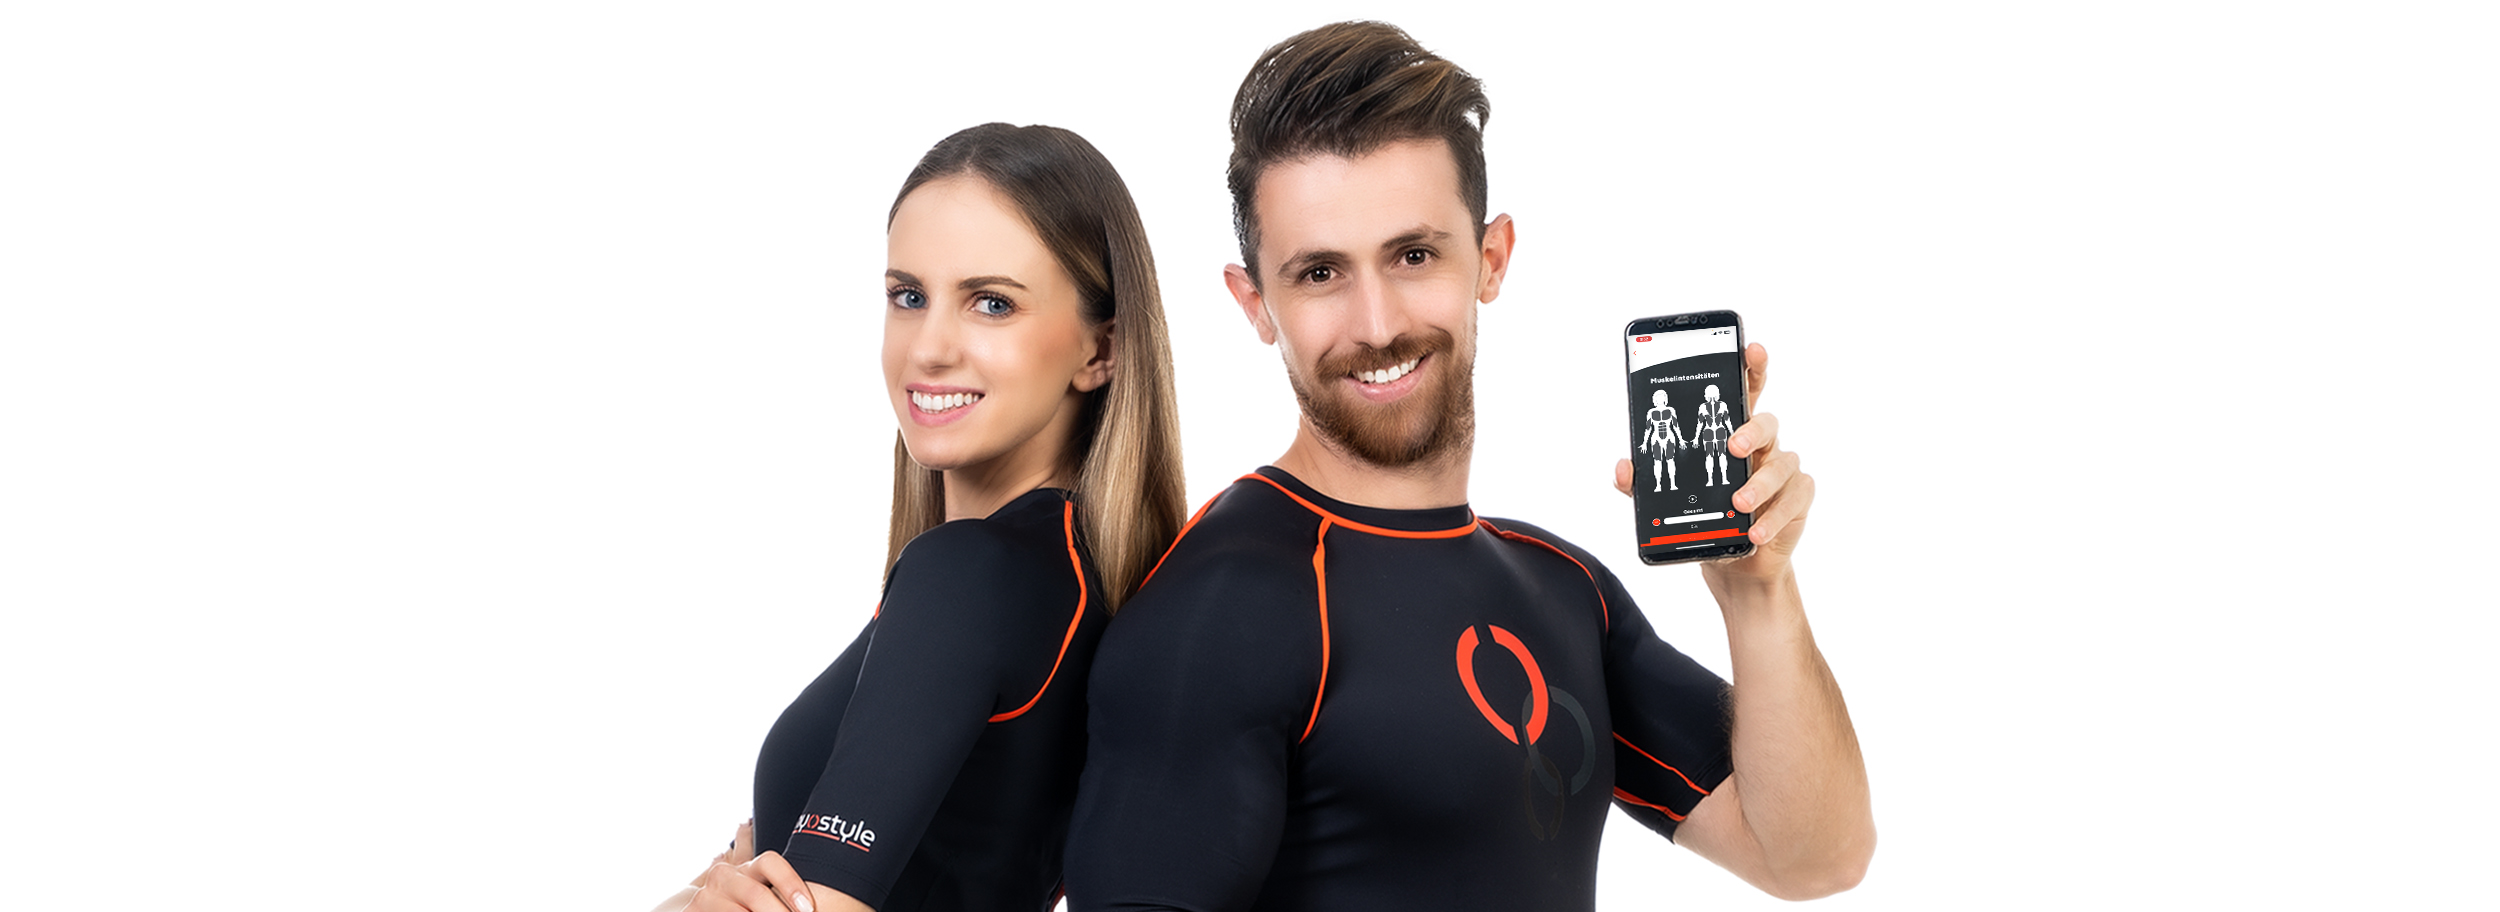 A man and woman wearing a myostyle wireless ems training suit. The man is holding a smartphone showing the ems training smart app.